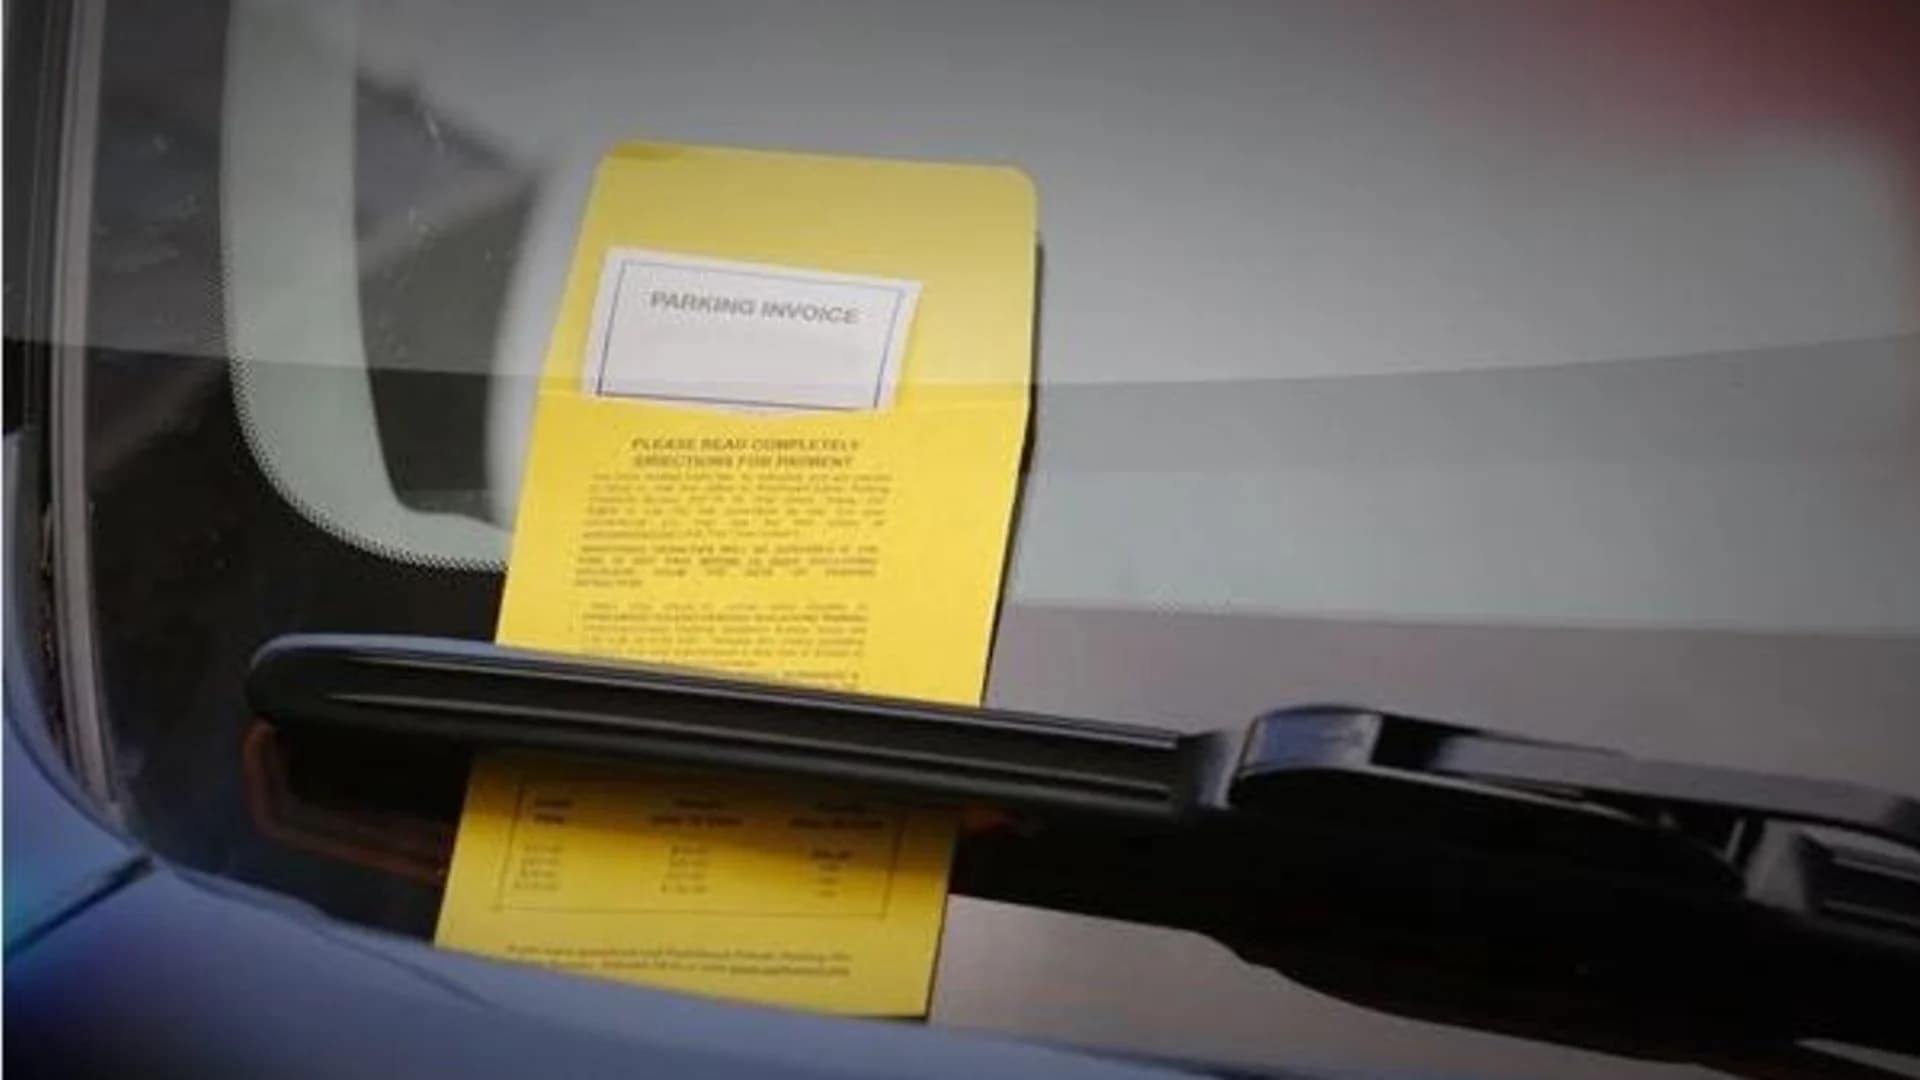 New law delays loss of license over parking fines in New Jersey